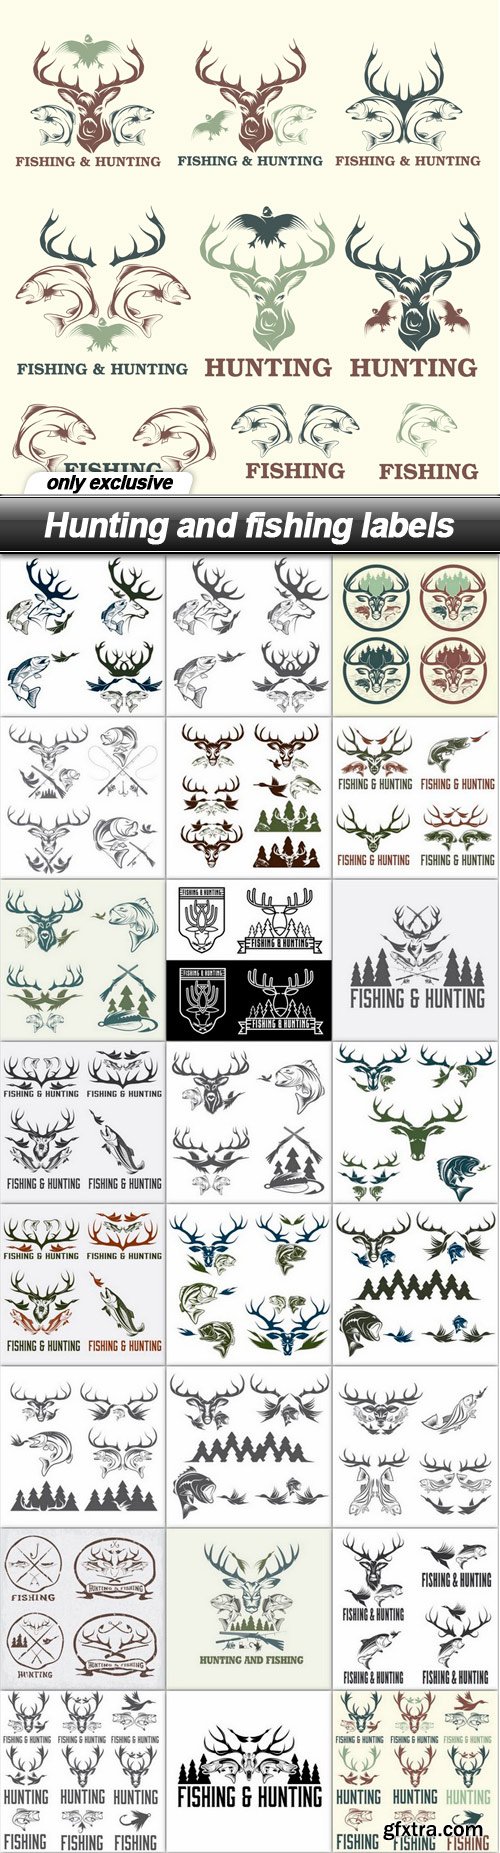 Hunting and fishing labels - 25 EPS